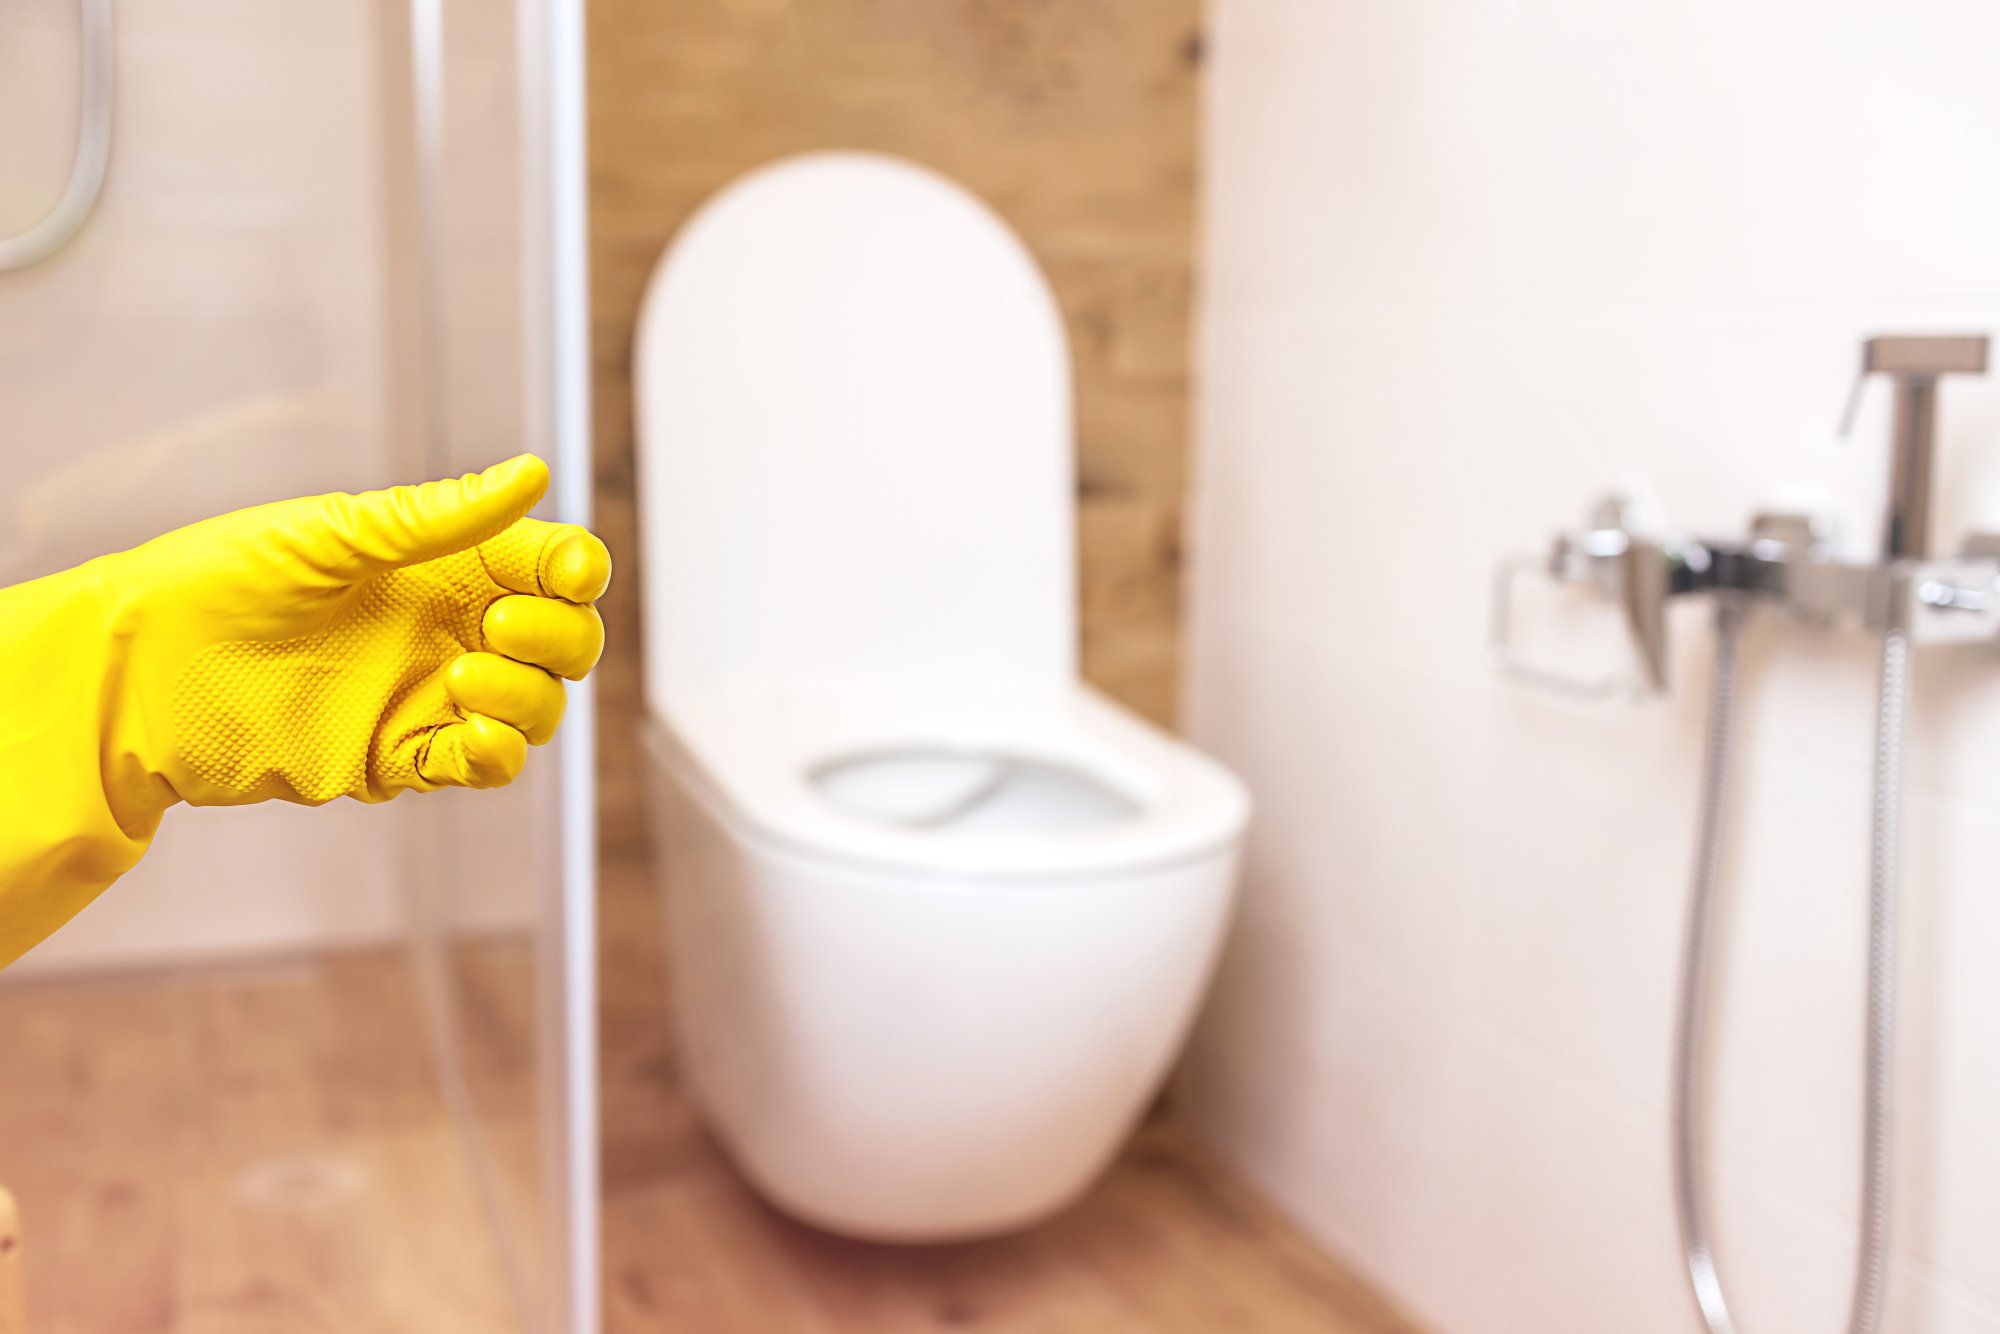 product-bottle-mockup-2-hands-protective-yellow-gloves-bathroom-background.jpg